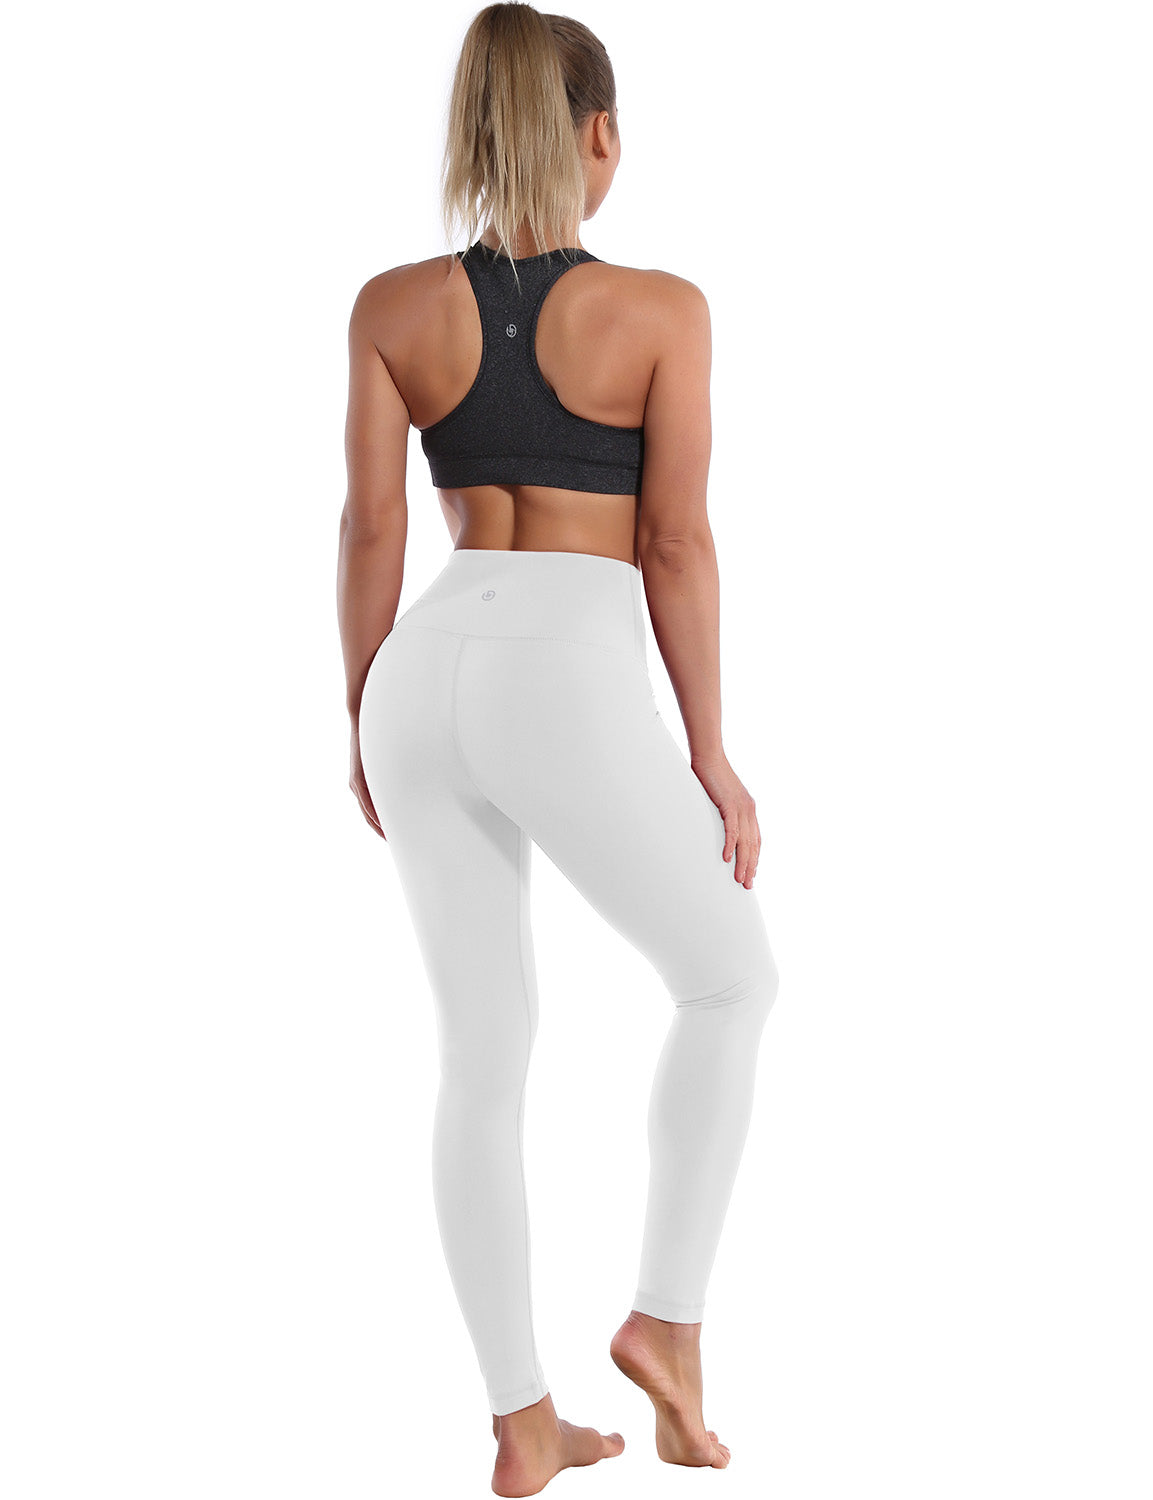 High Waist Running Pants white 75%Nylon/25%Spandex Fabric doesn't attract lint easily 4-way stretch No see-through Moisture-wicking Tummy control Inner pocket Four lengths